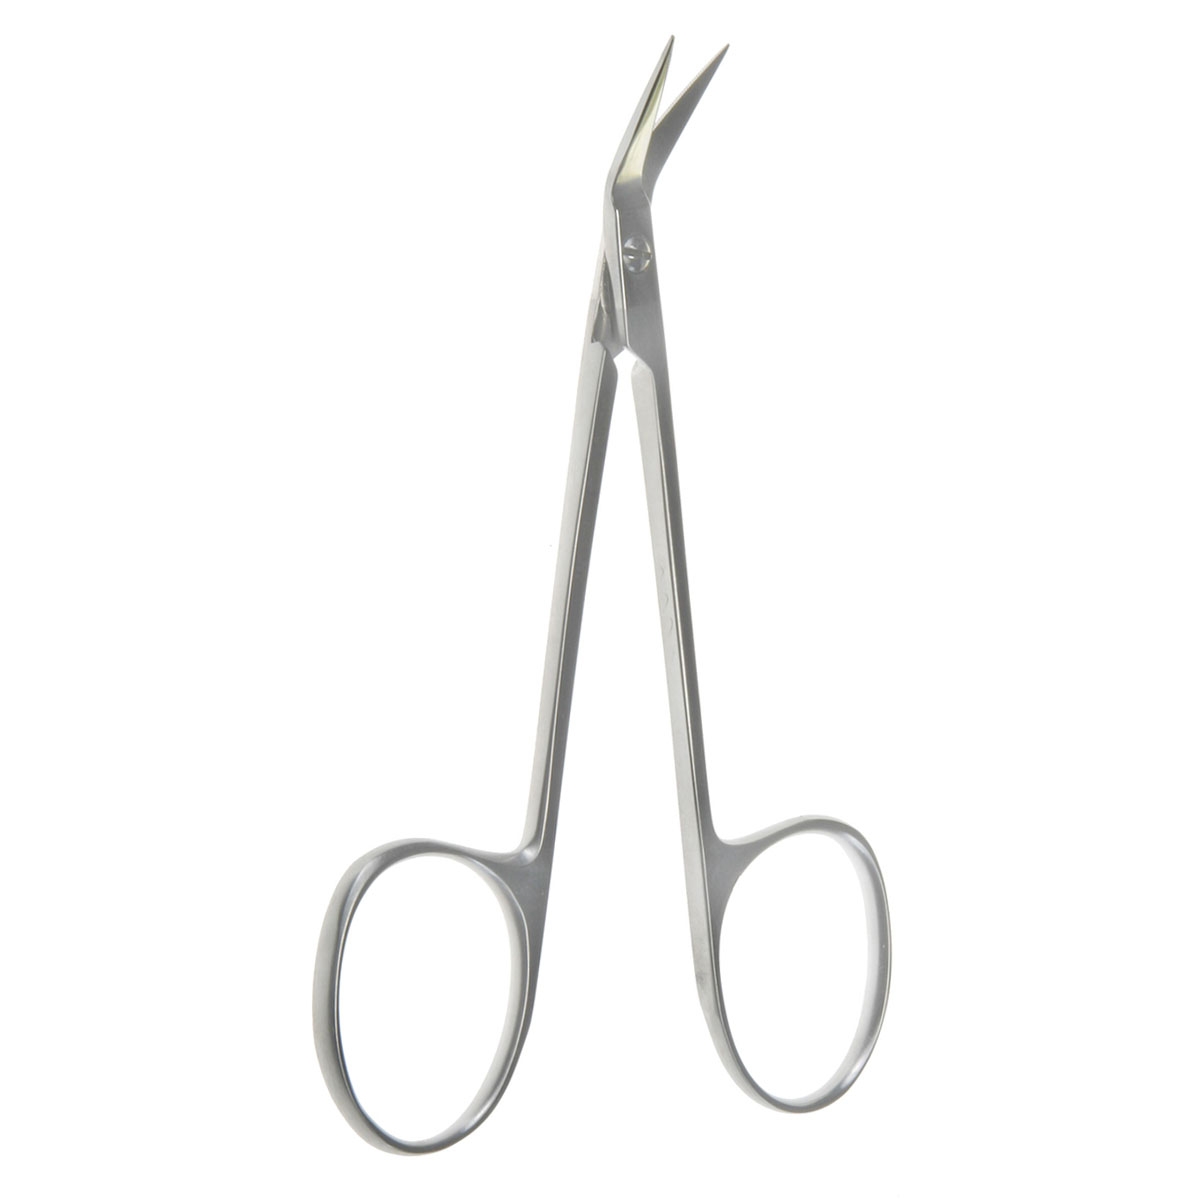 3 3/4 Wilmer Conjunct Utility Scissors - ang - BOSS Surgical Instruments